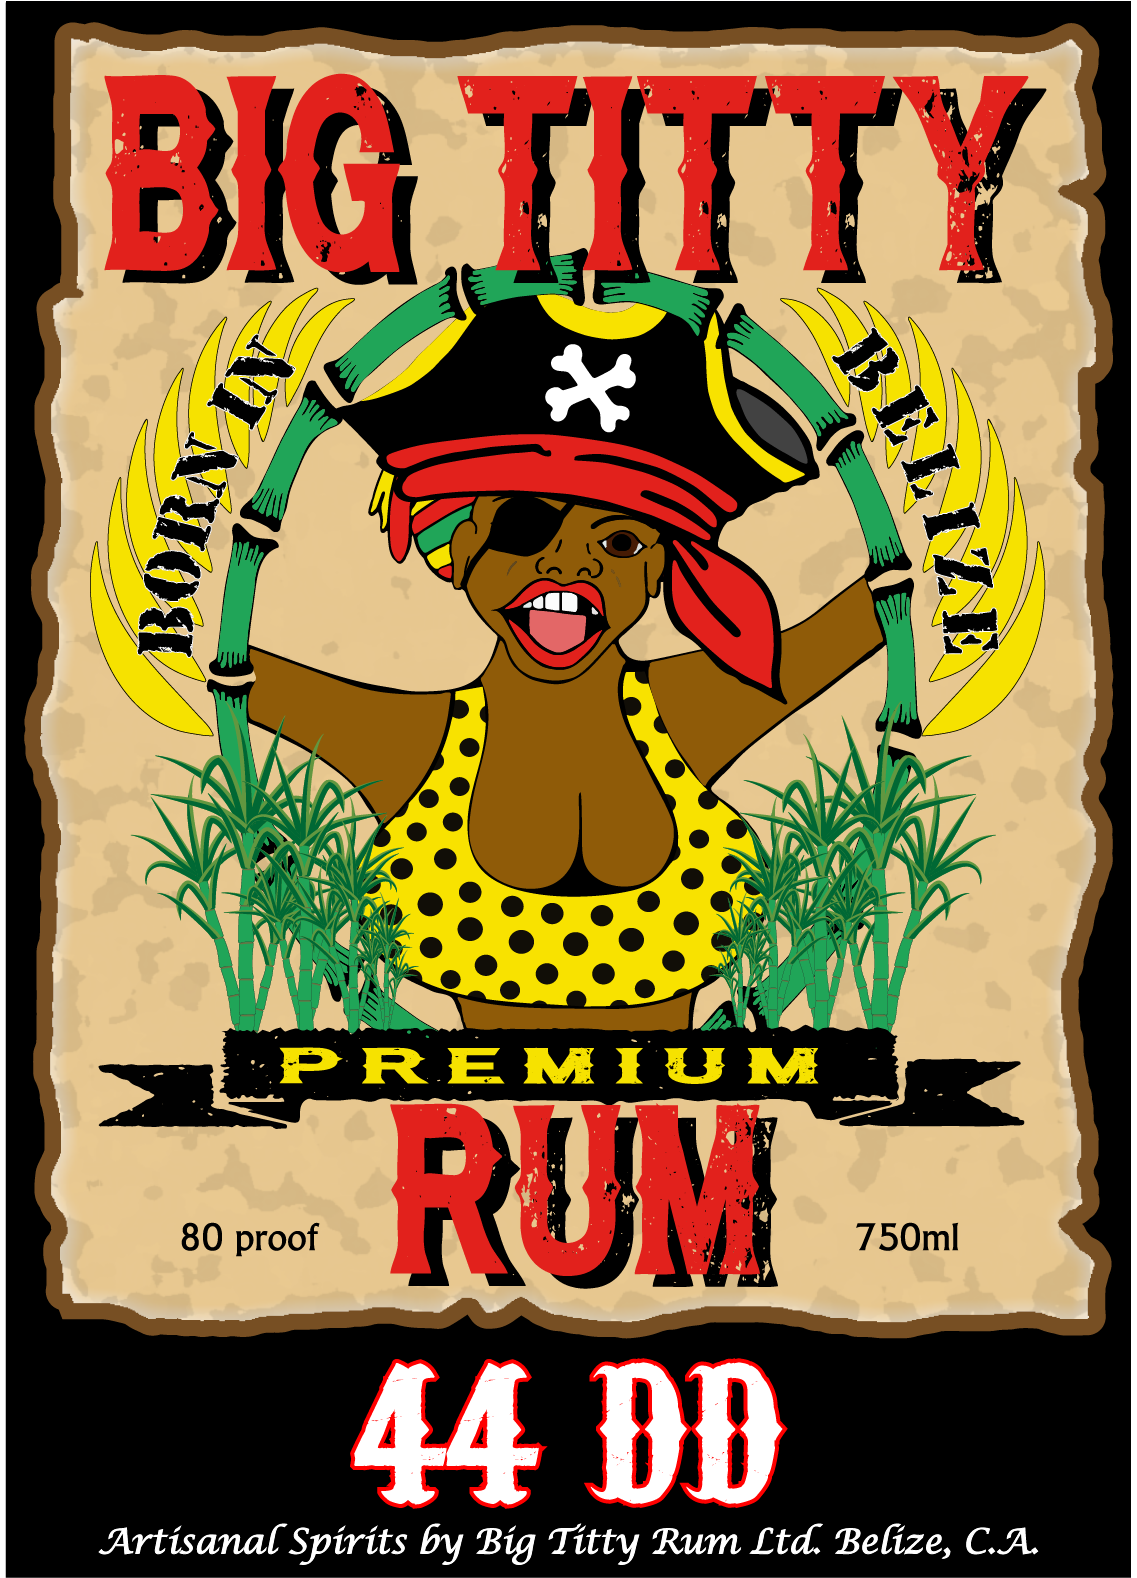 BigTittyRum logo and spirit Posters